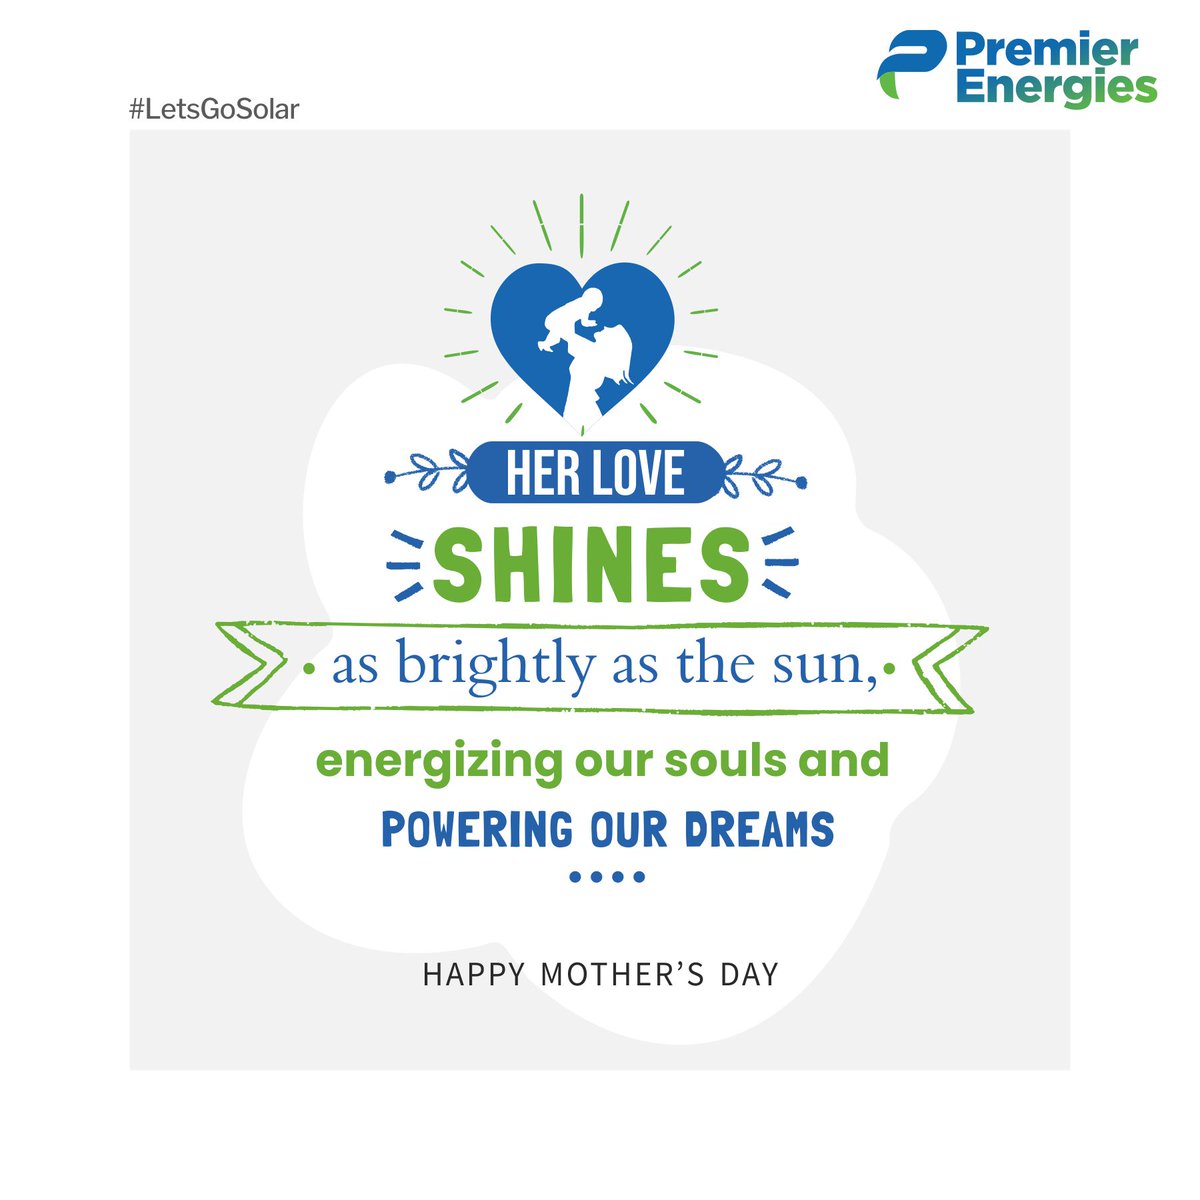 Happy Mother's Day to the guiding lights who illuminate our paths with love.
#HappyMothersDay #Motherhood #MotherlyLove #ForeverGrateful #SuperHeroes #MothersDay2024 #PremierEnergies #EternalProsperity #LetsGoSolar #GreenLiving #RenewableEnergy #Solar #SolarEnergy #SolarPanels